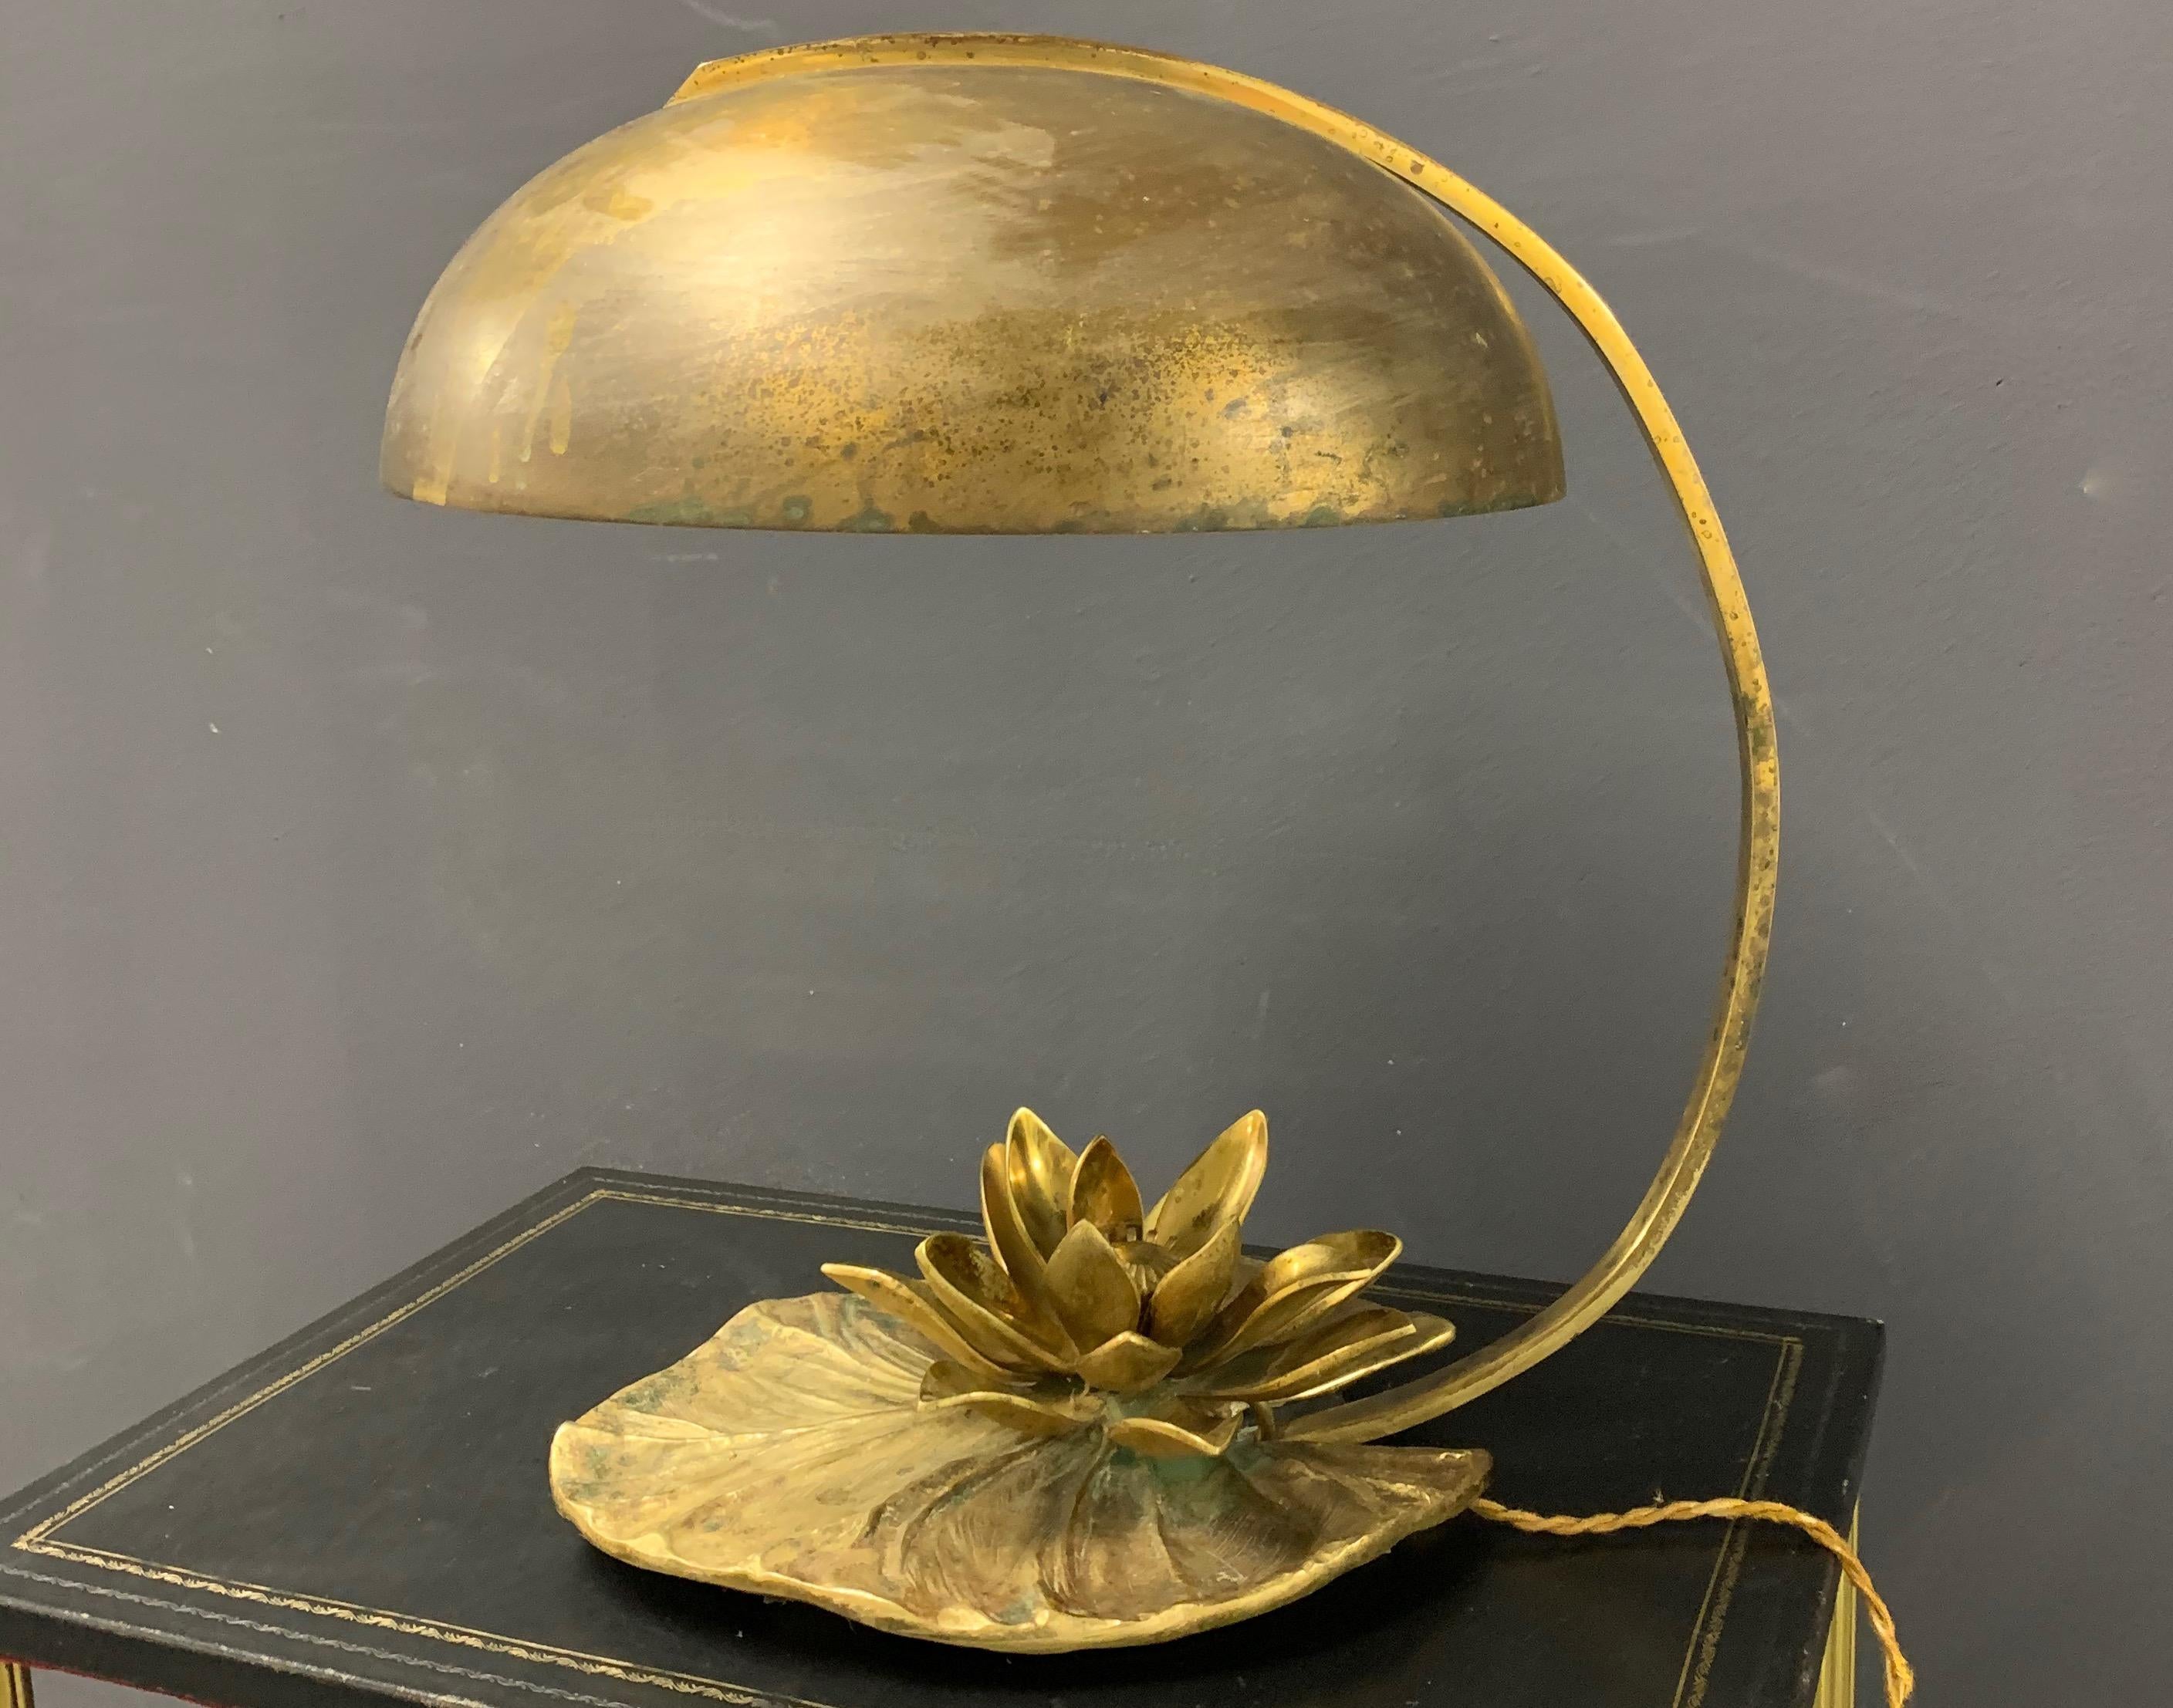 Amazing Water Lily / Nenuphar Table Lamp with Crazy Patina For Sale 8